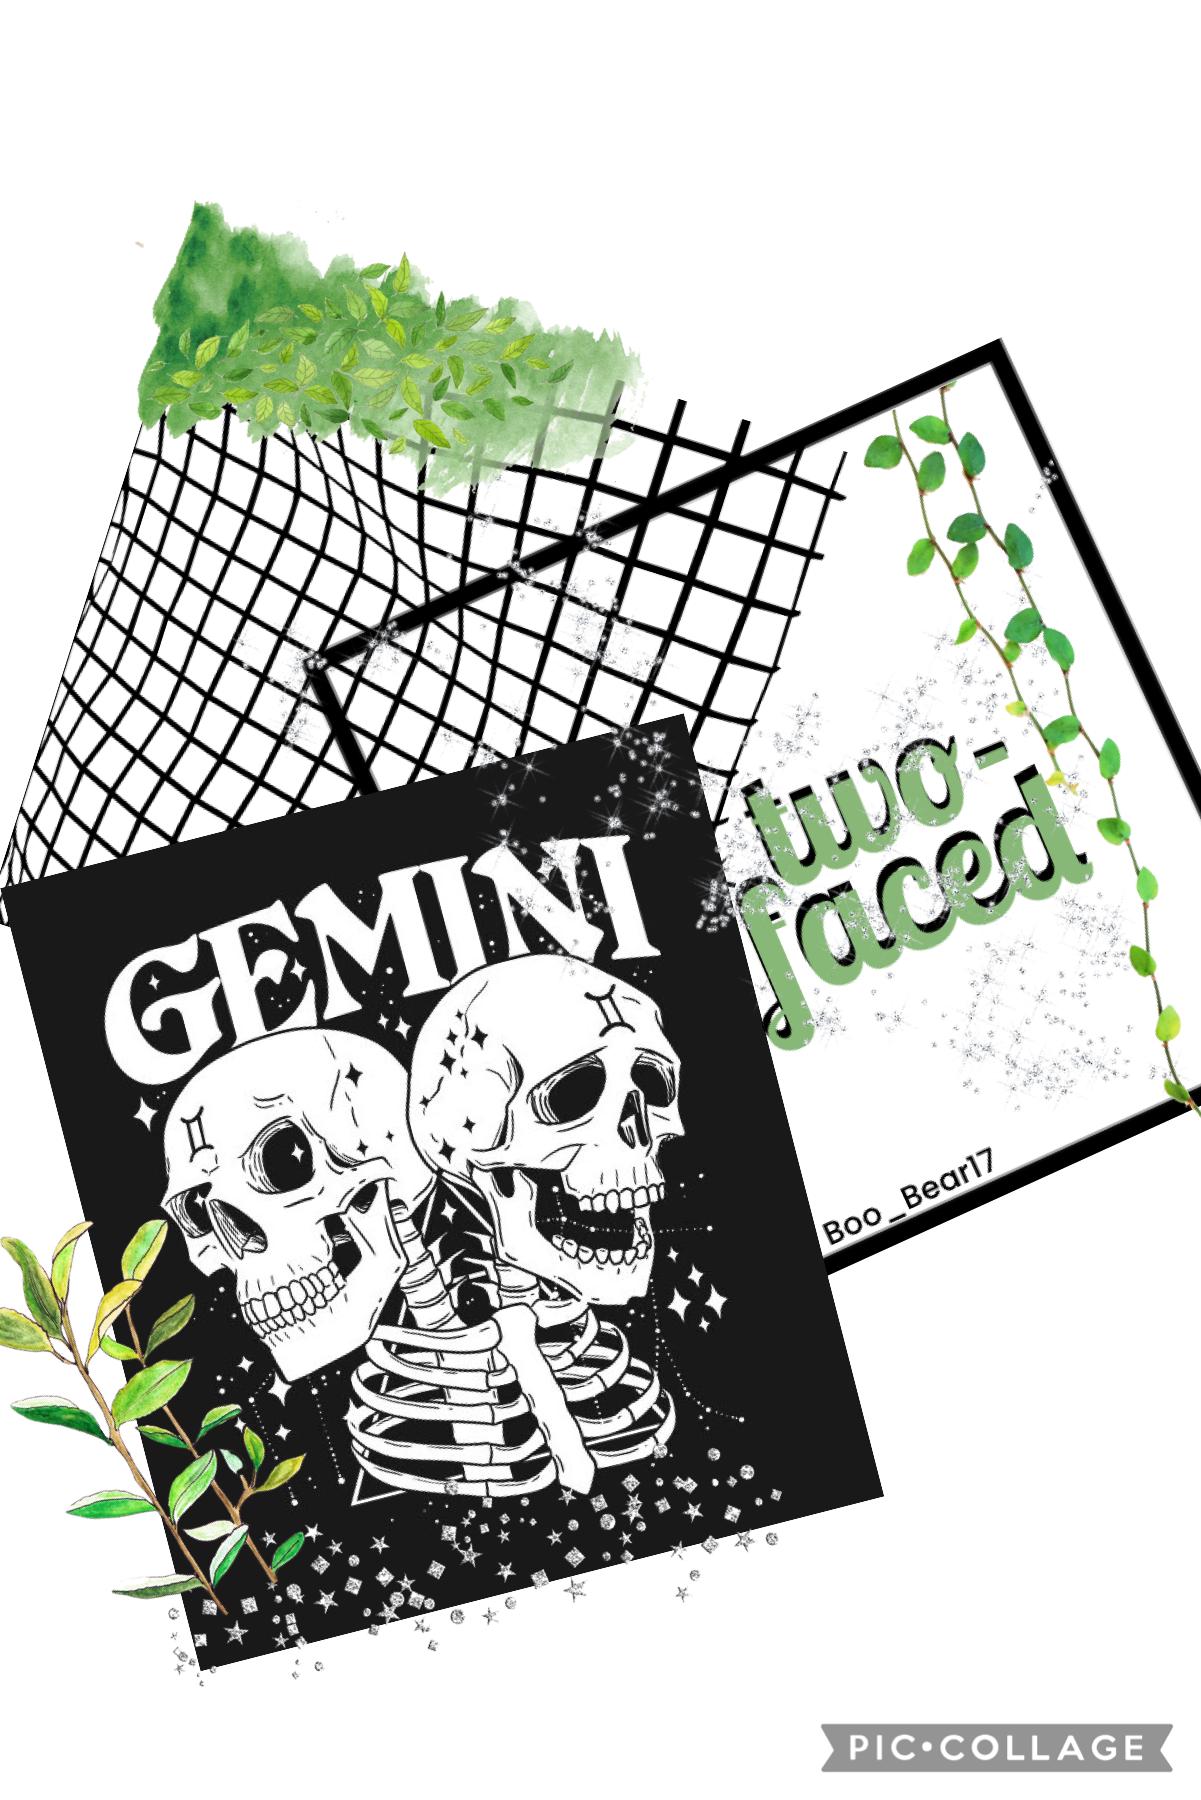 🍃two-faced🍃
•long time no see :) i’m finally back after a year long break and will be back making edits and rp’s
•i’m a gemini and i hear this a lot and it was an easy edit to get back into the swing of things 
